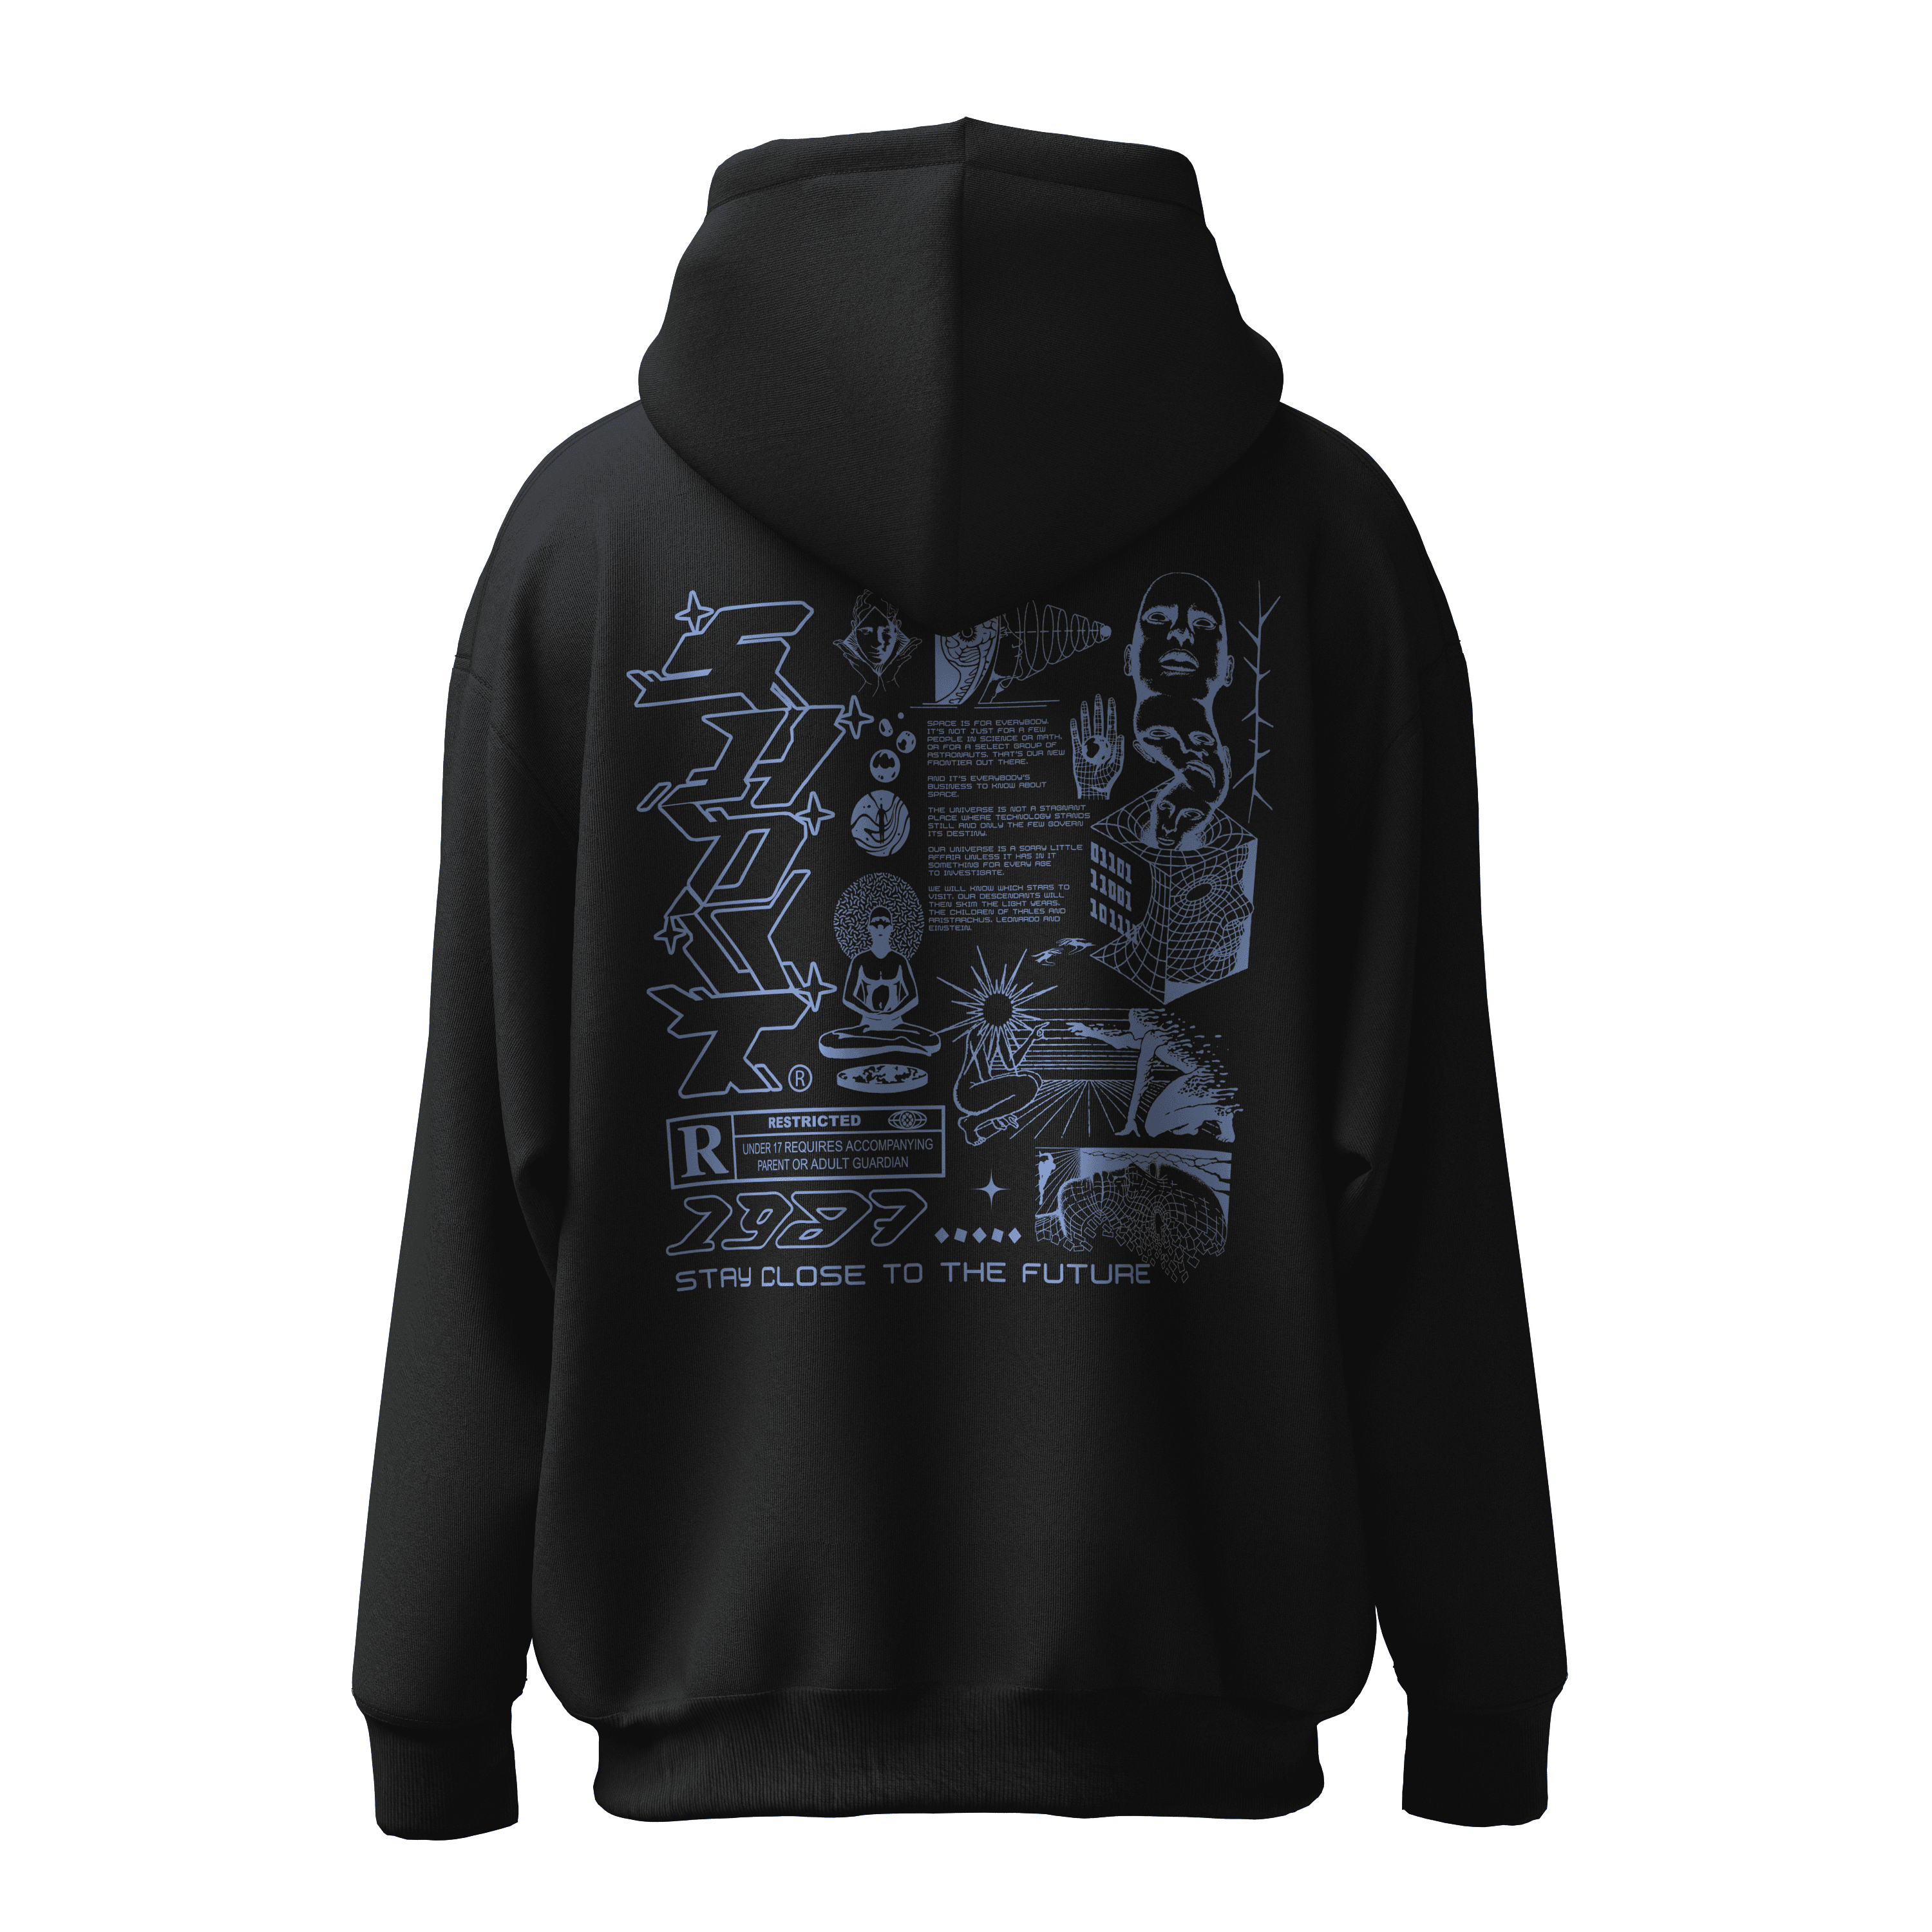 Shout Oversize Stay Close To The Future Zip Up Hoodie